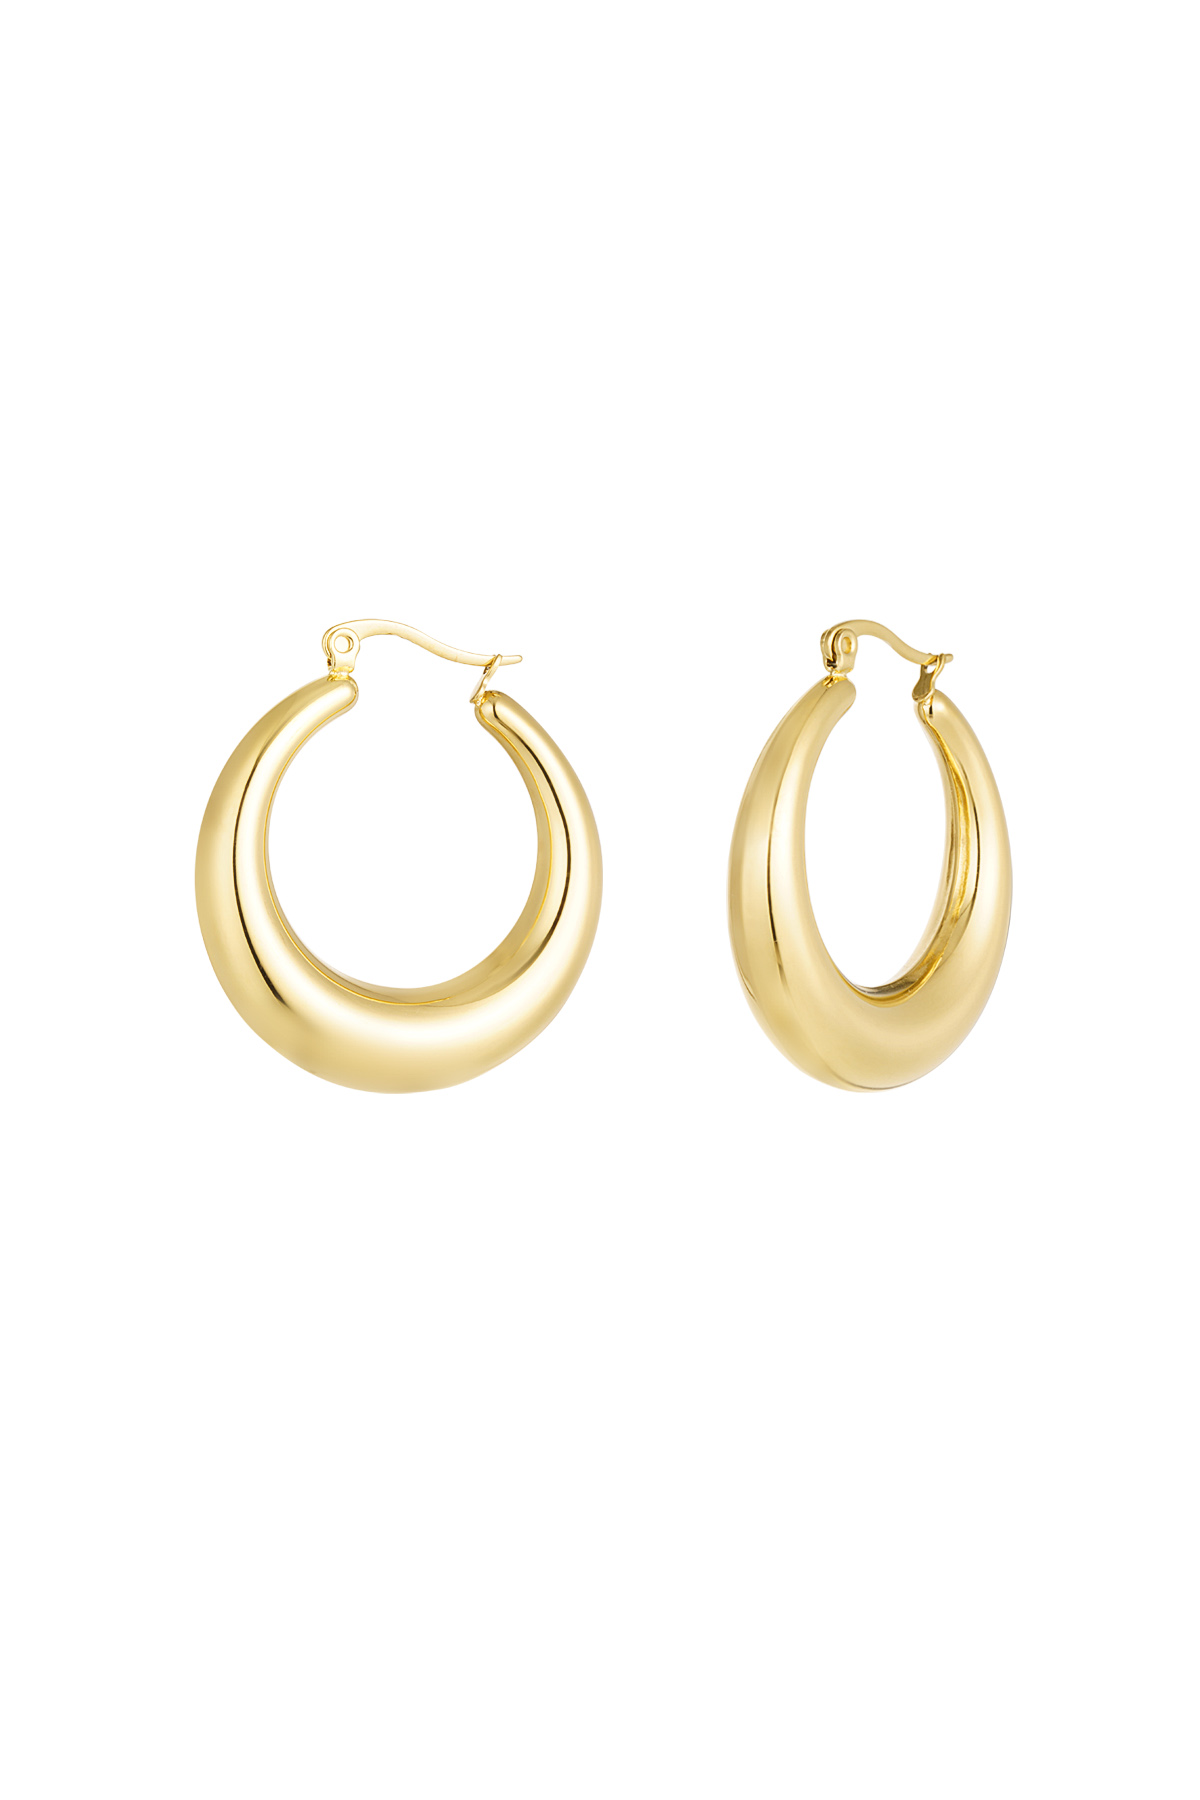 Earrings cute round - gold h5 